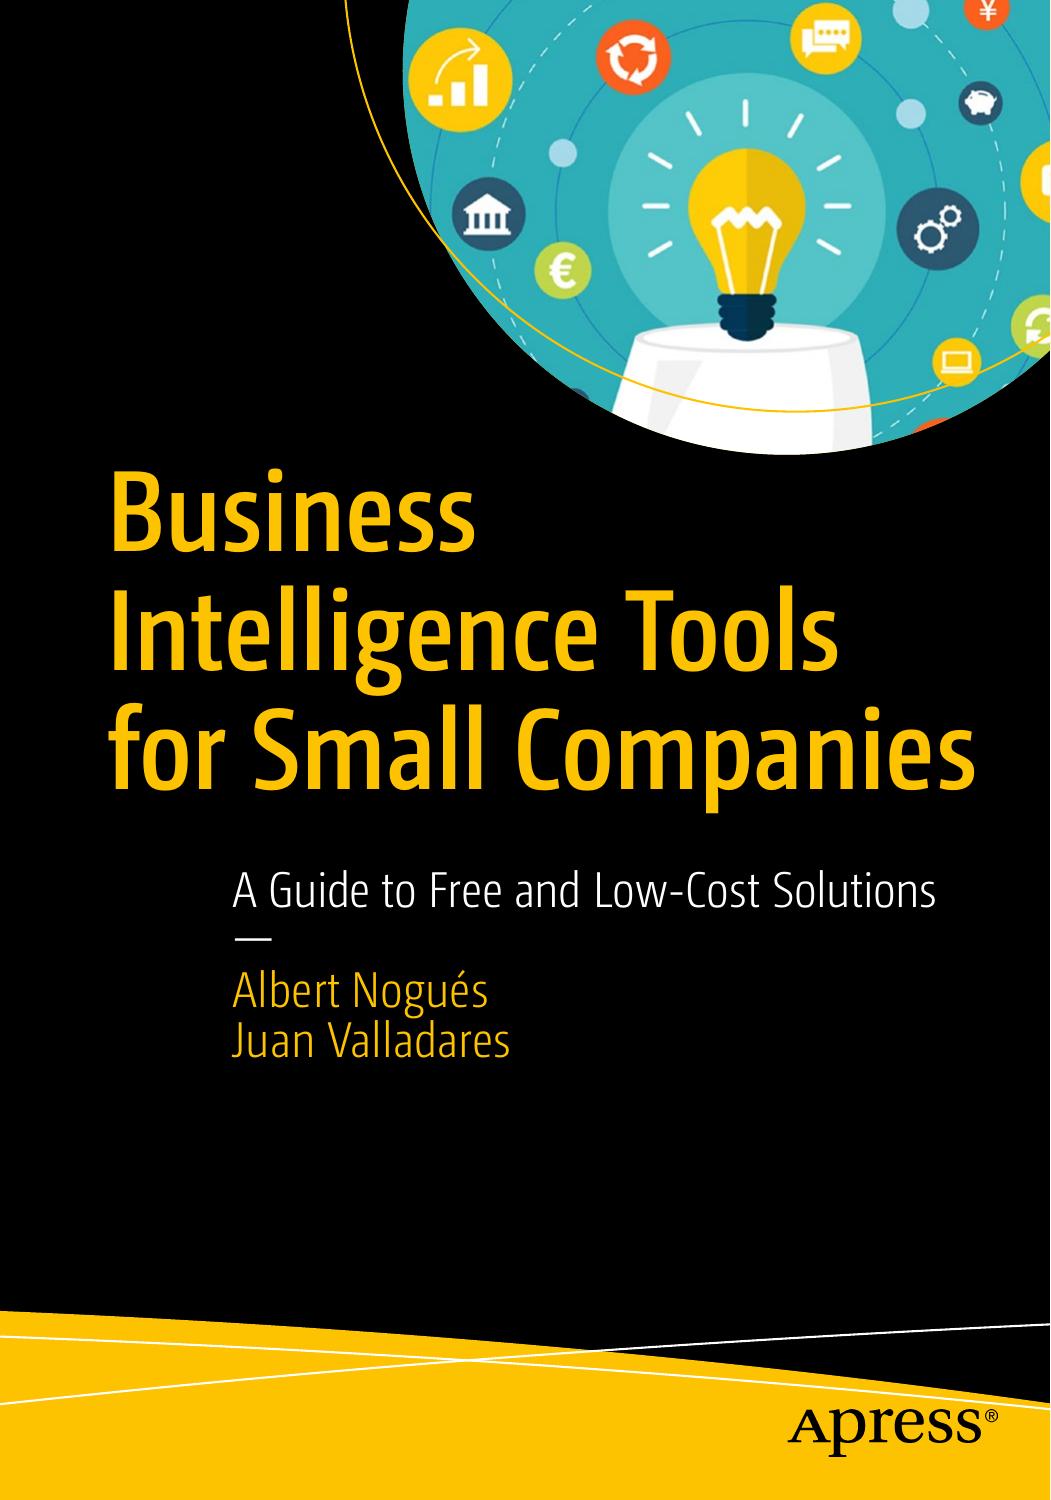 Business Intelligence Tools for Small Companies A Guide to Free and Low-Cost Solutions 2017 PDF